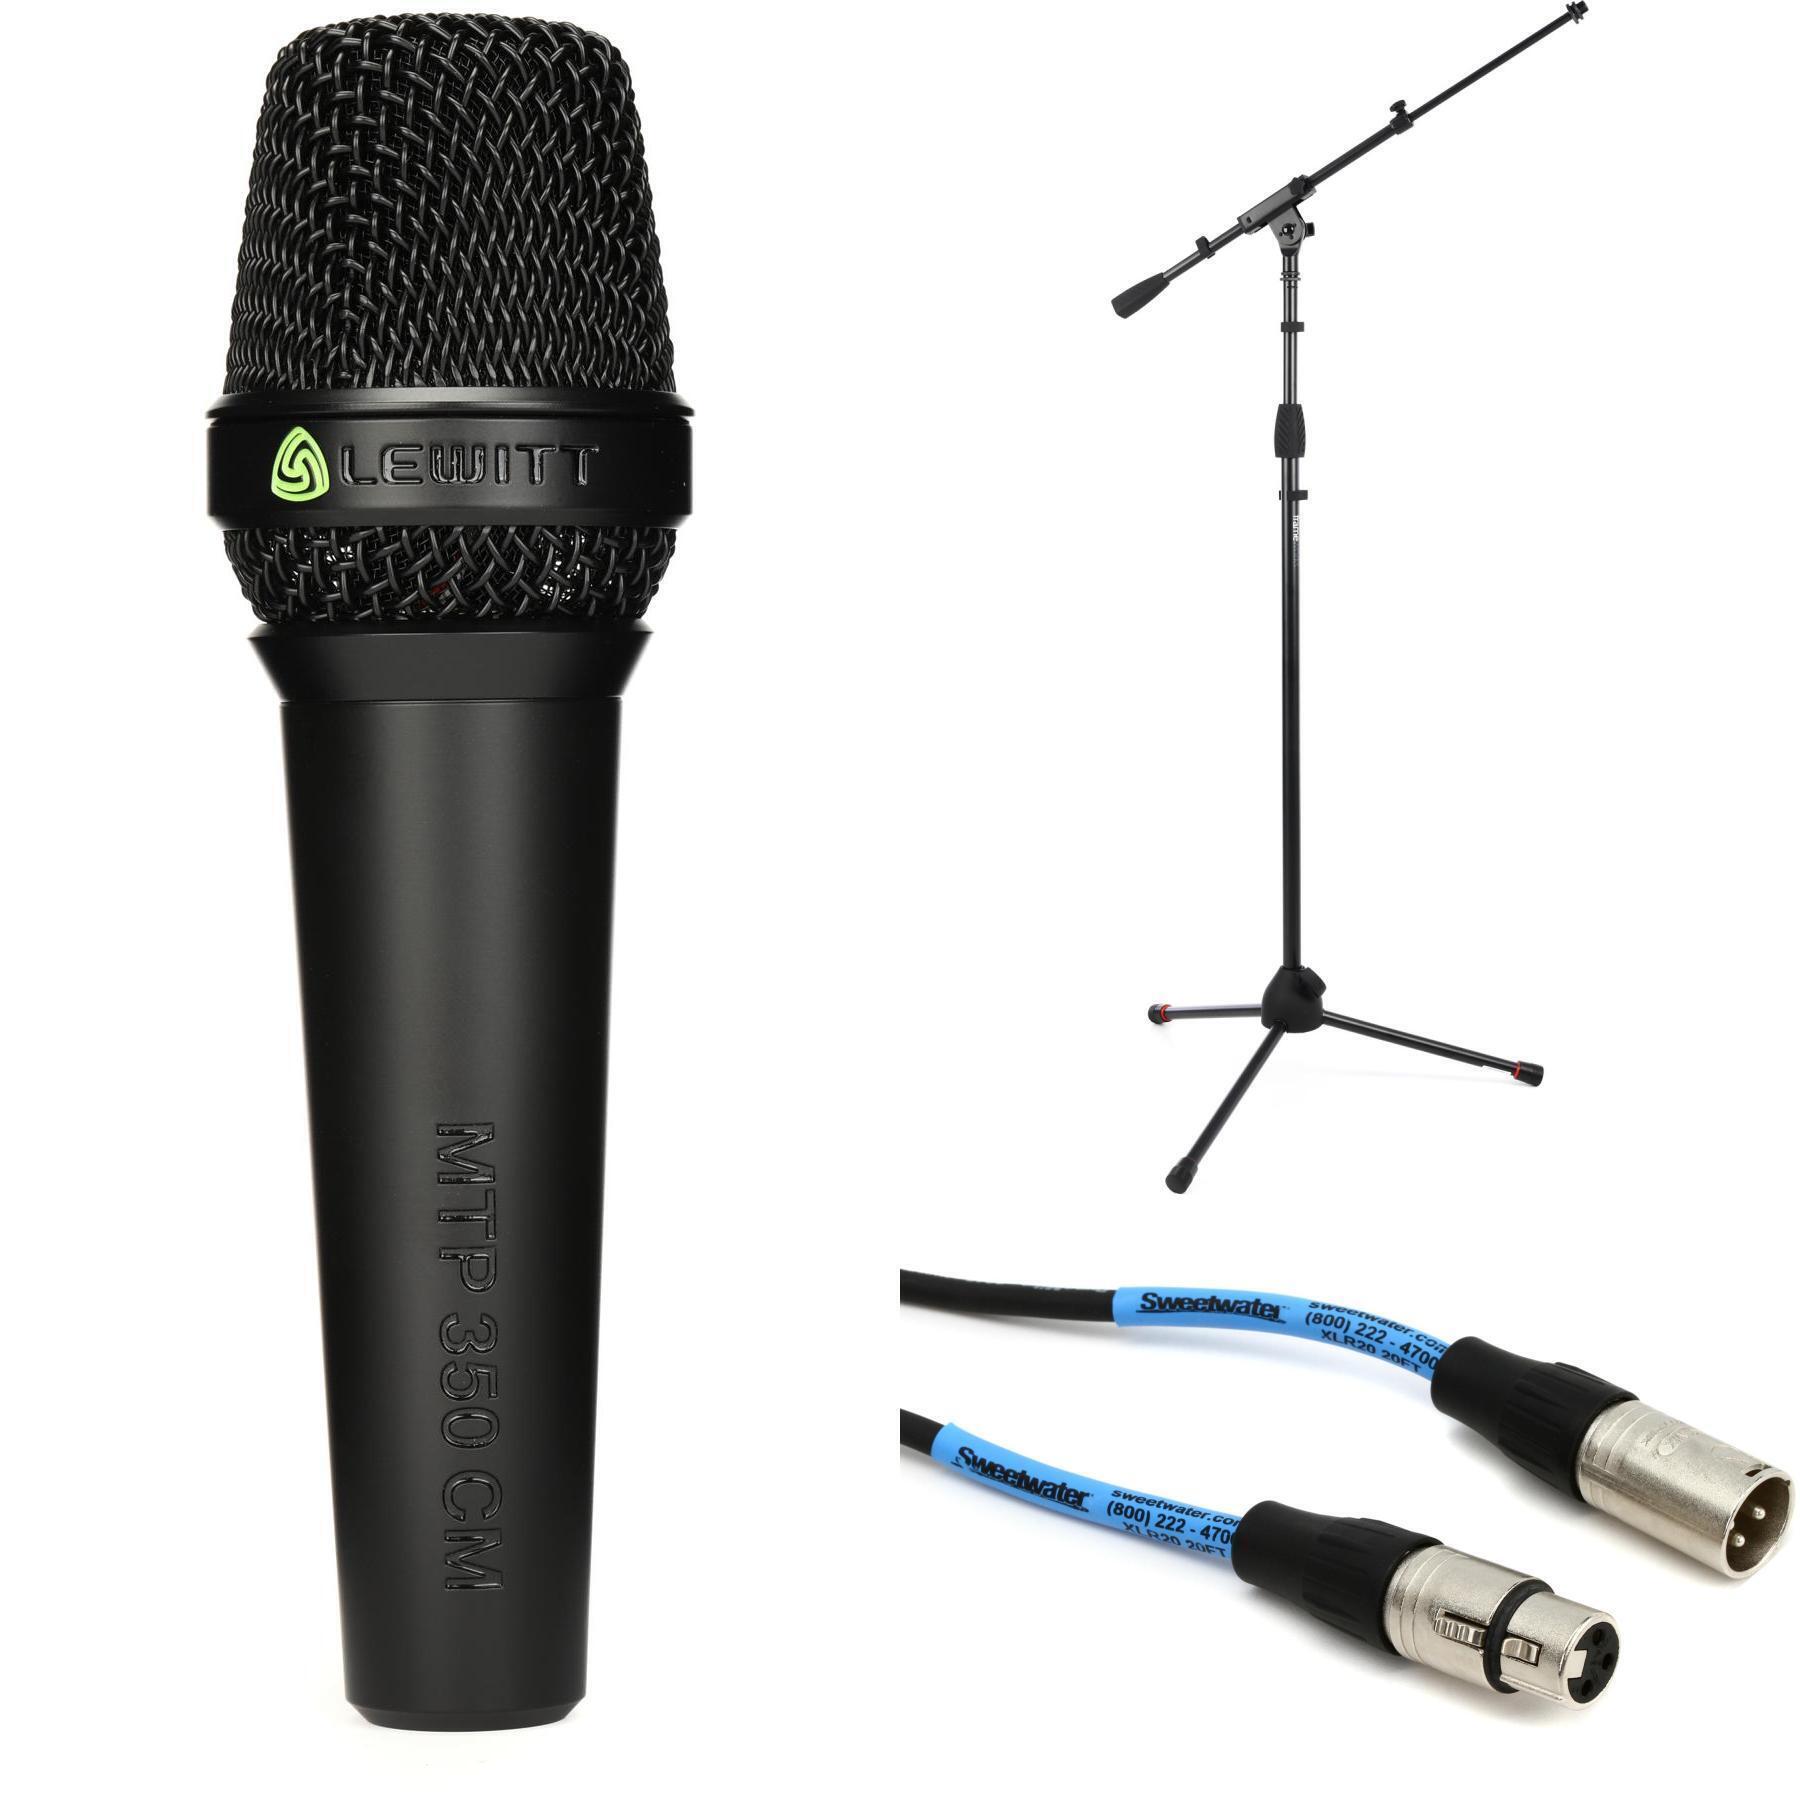 Lewitt MTP 350 CM Handheld Condenser Microphone With Stand and